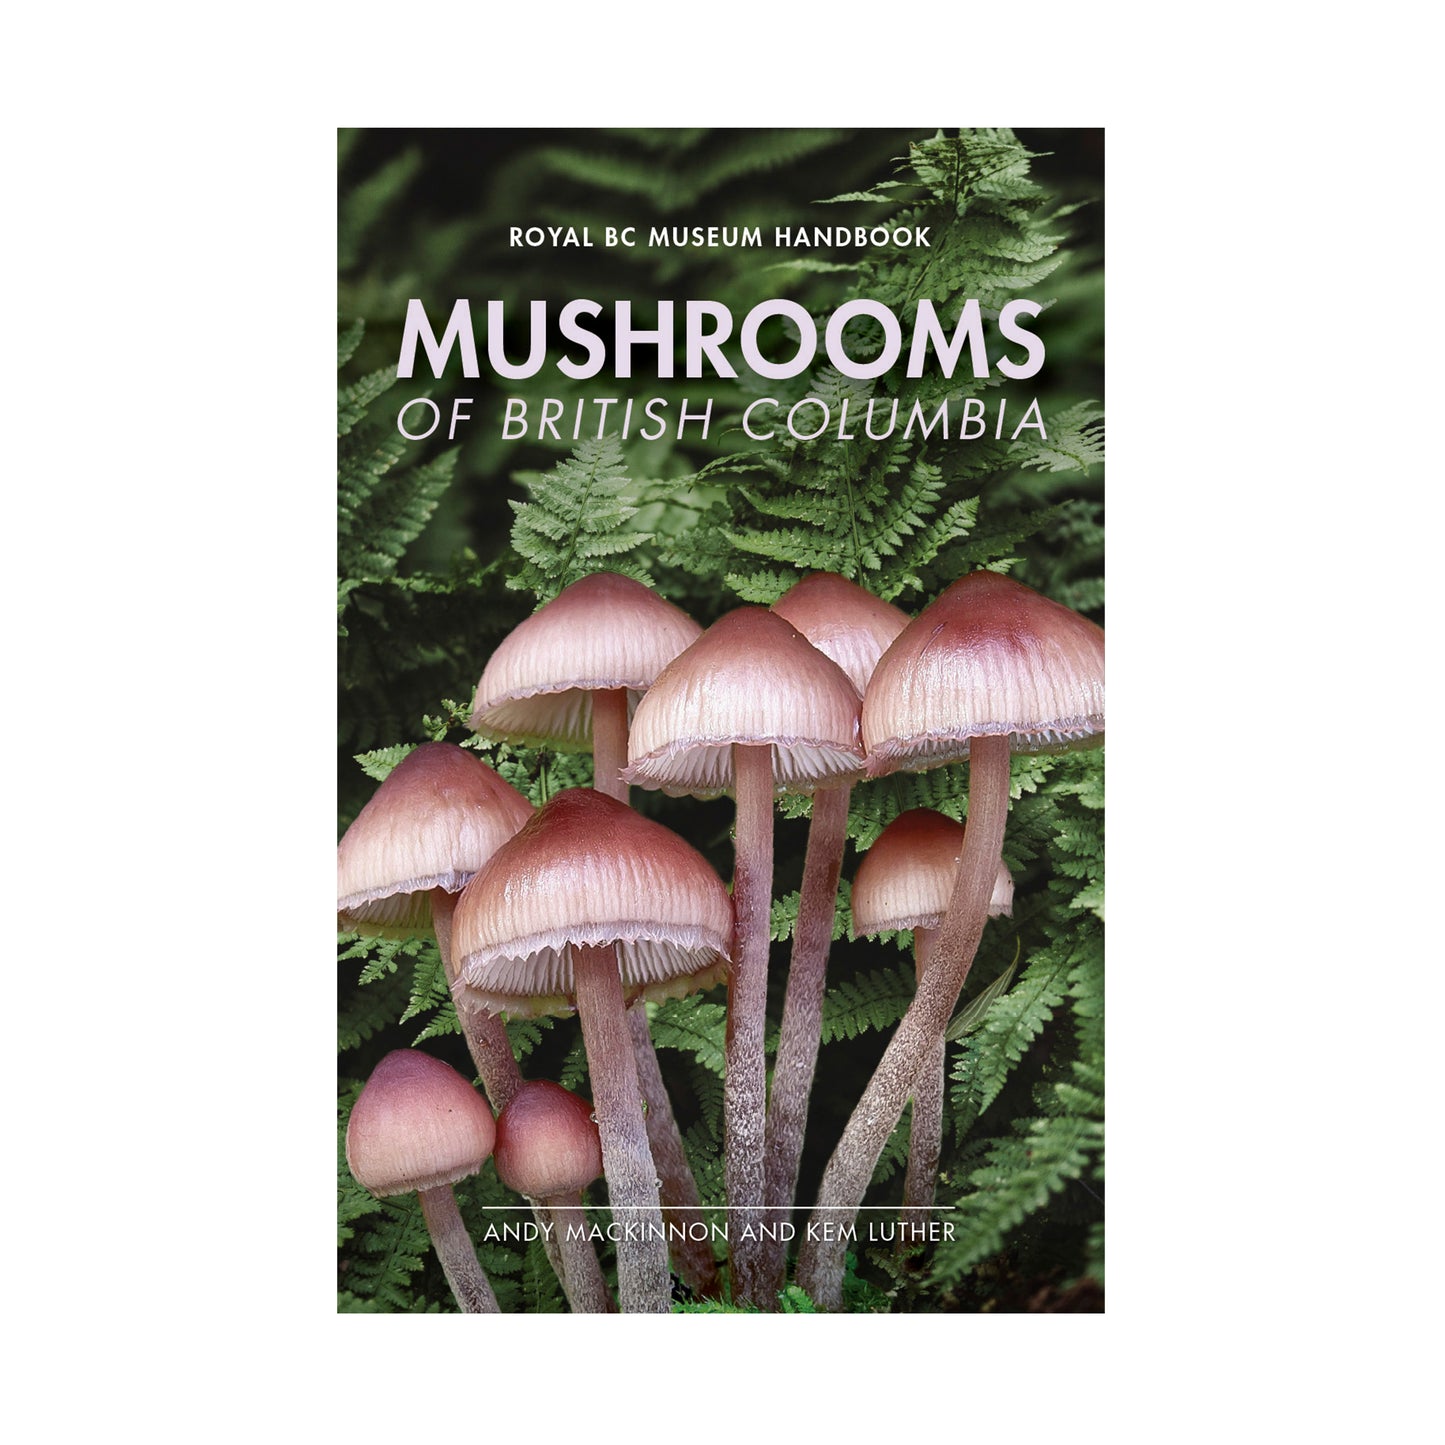 Mushrooms of British Columbia by Andy Mackinnon and Kem Luther